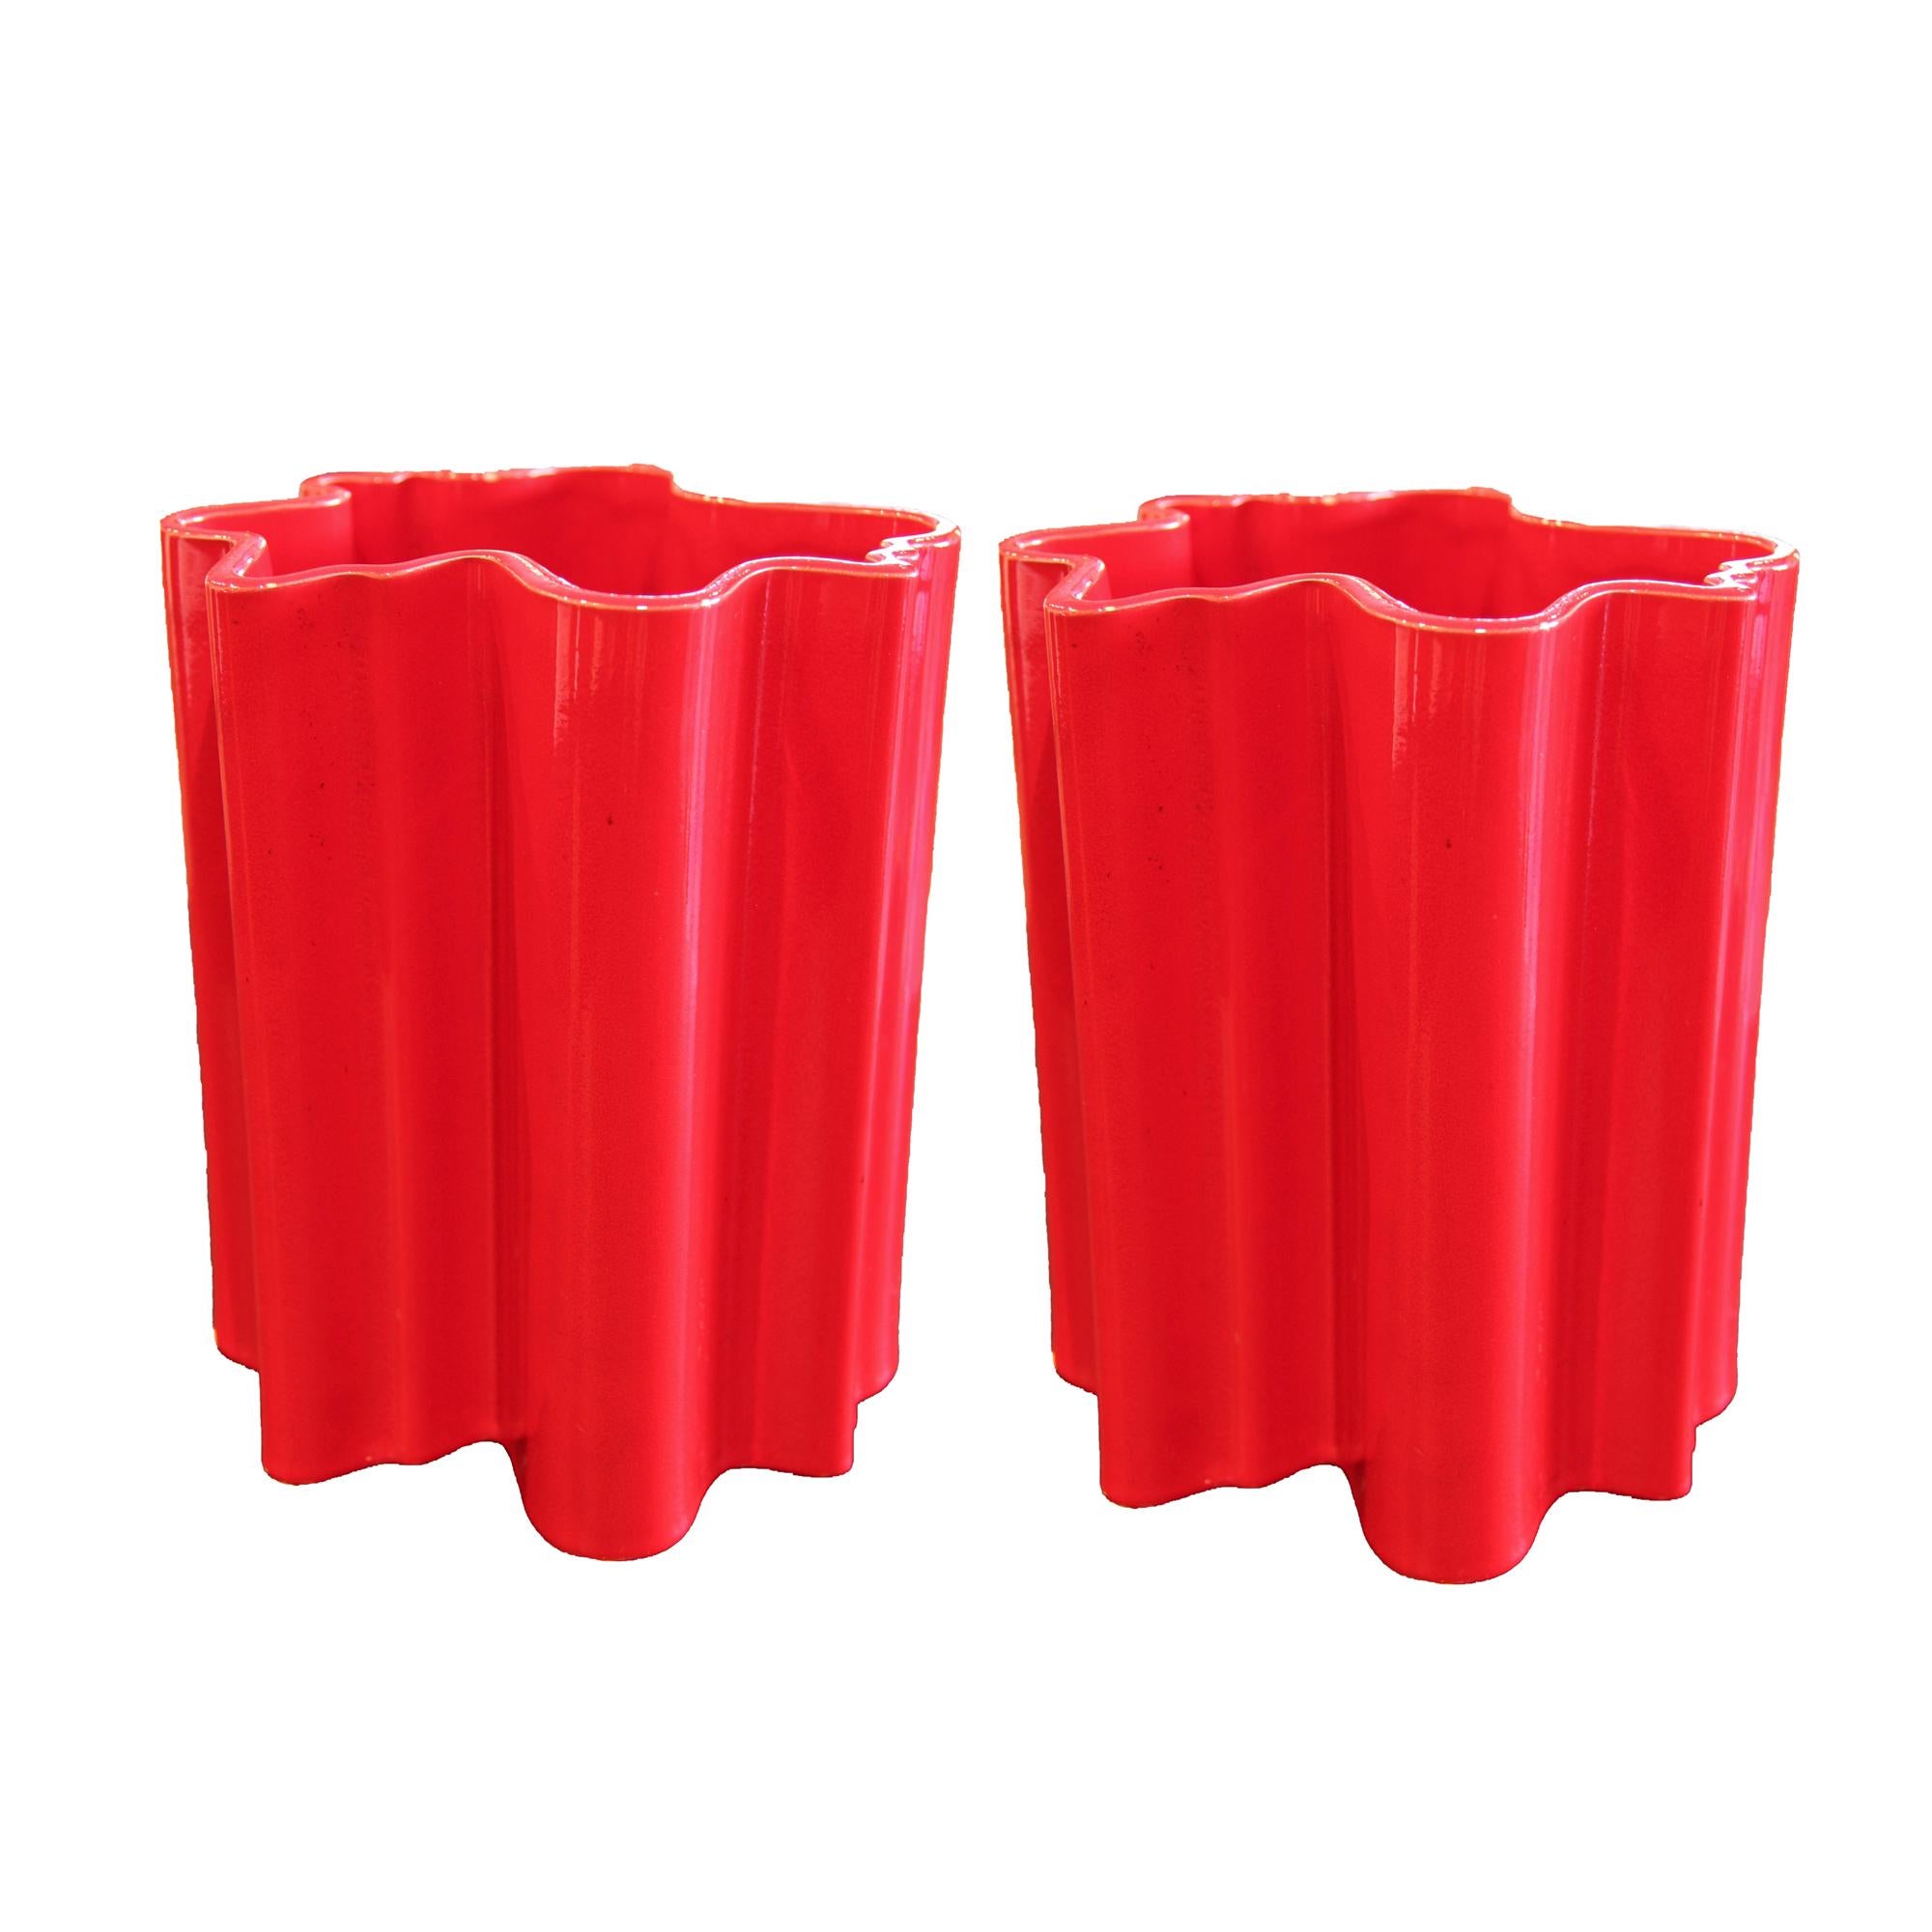 Playful pair of bright red glazed ceramic vases. The mouth/opening of each vase has an undulating wave pattern that continues into the rest of the body. These iconic vases are part of the series of vessels designed by Italian architect Angelo